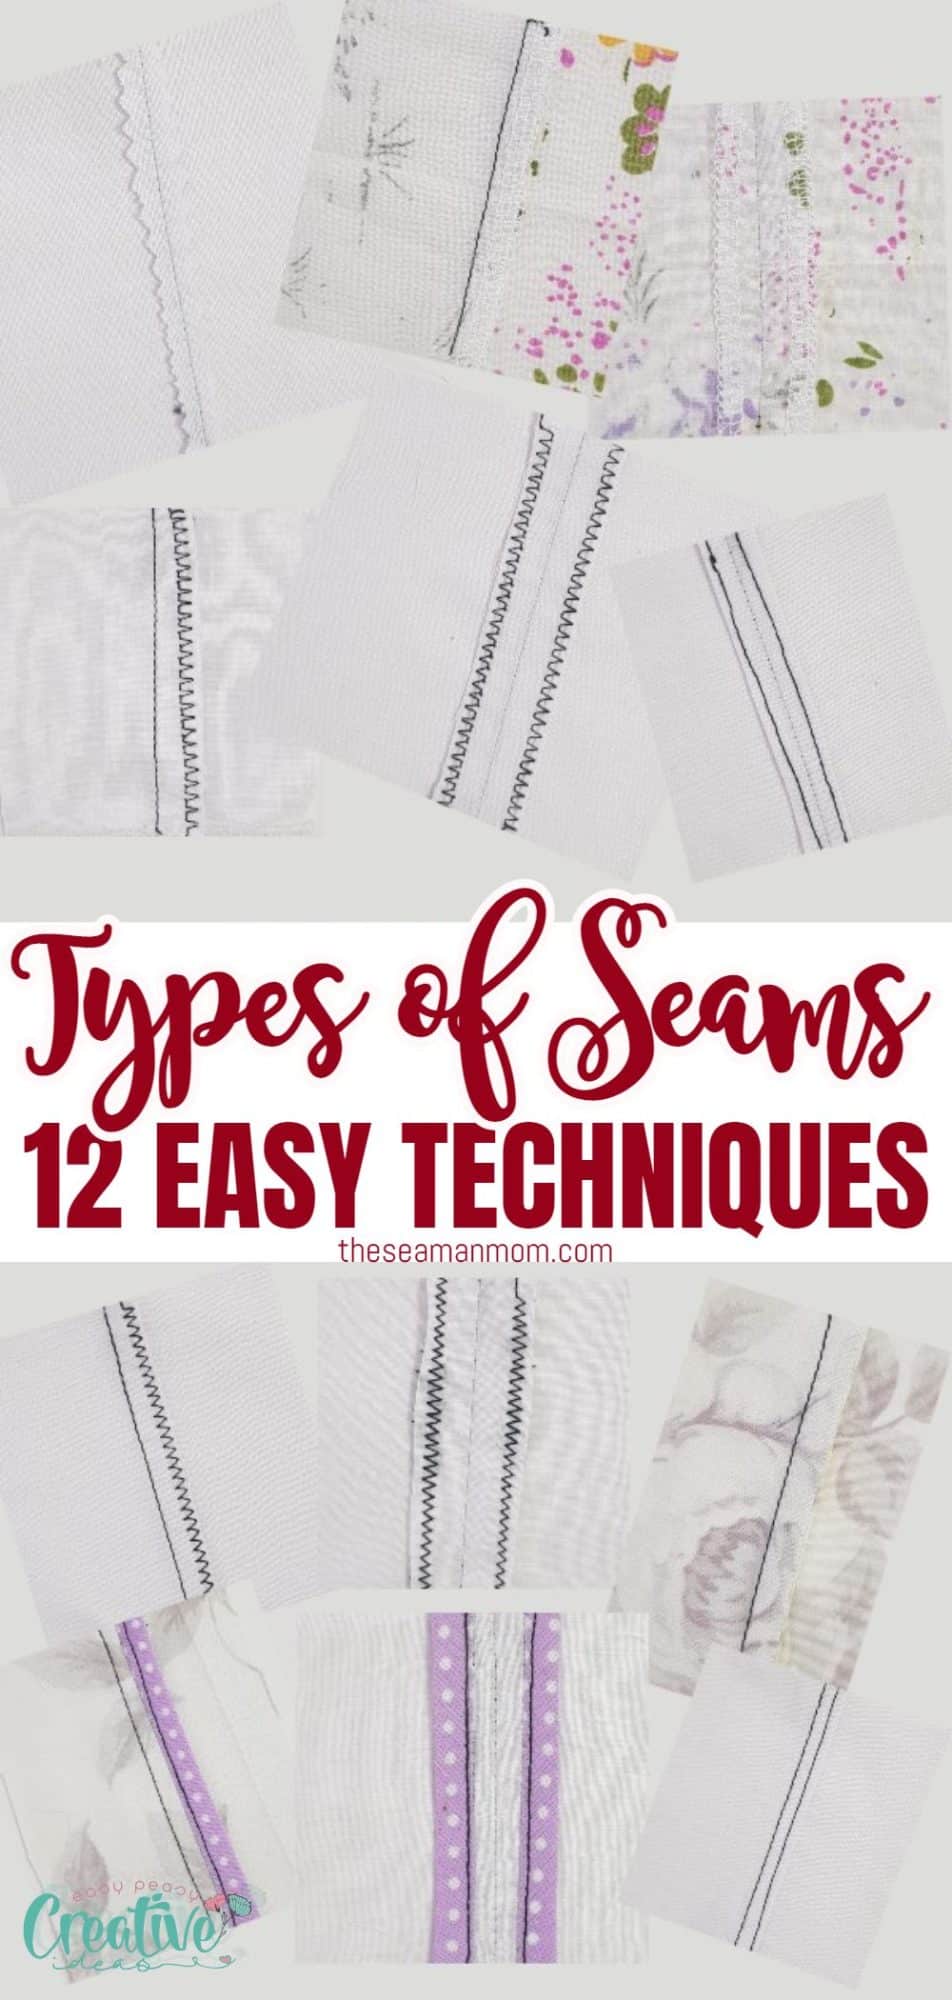 What kind of seam guide can I use? Which is easiest and/or most